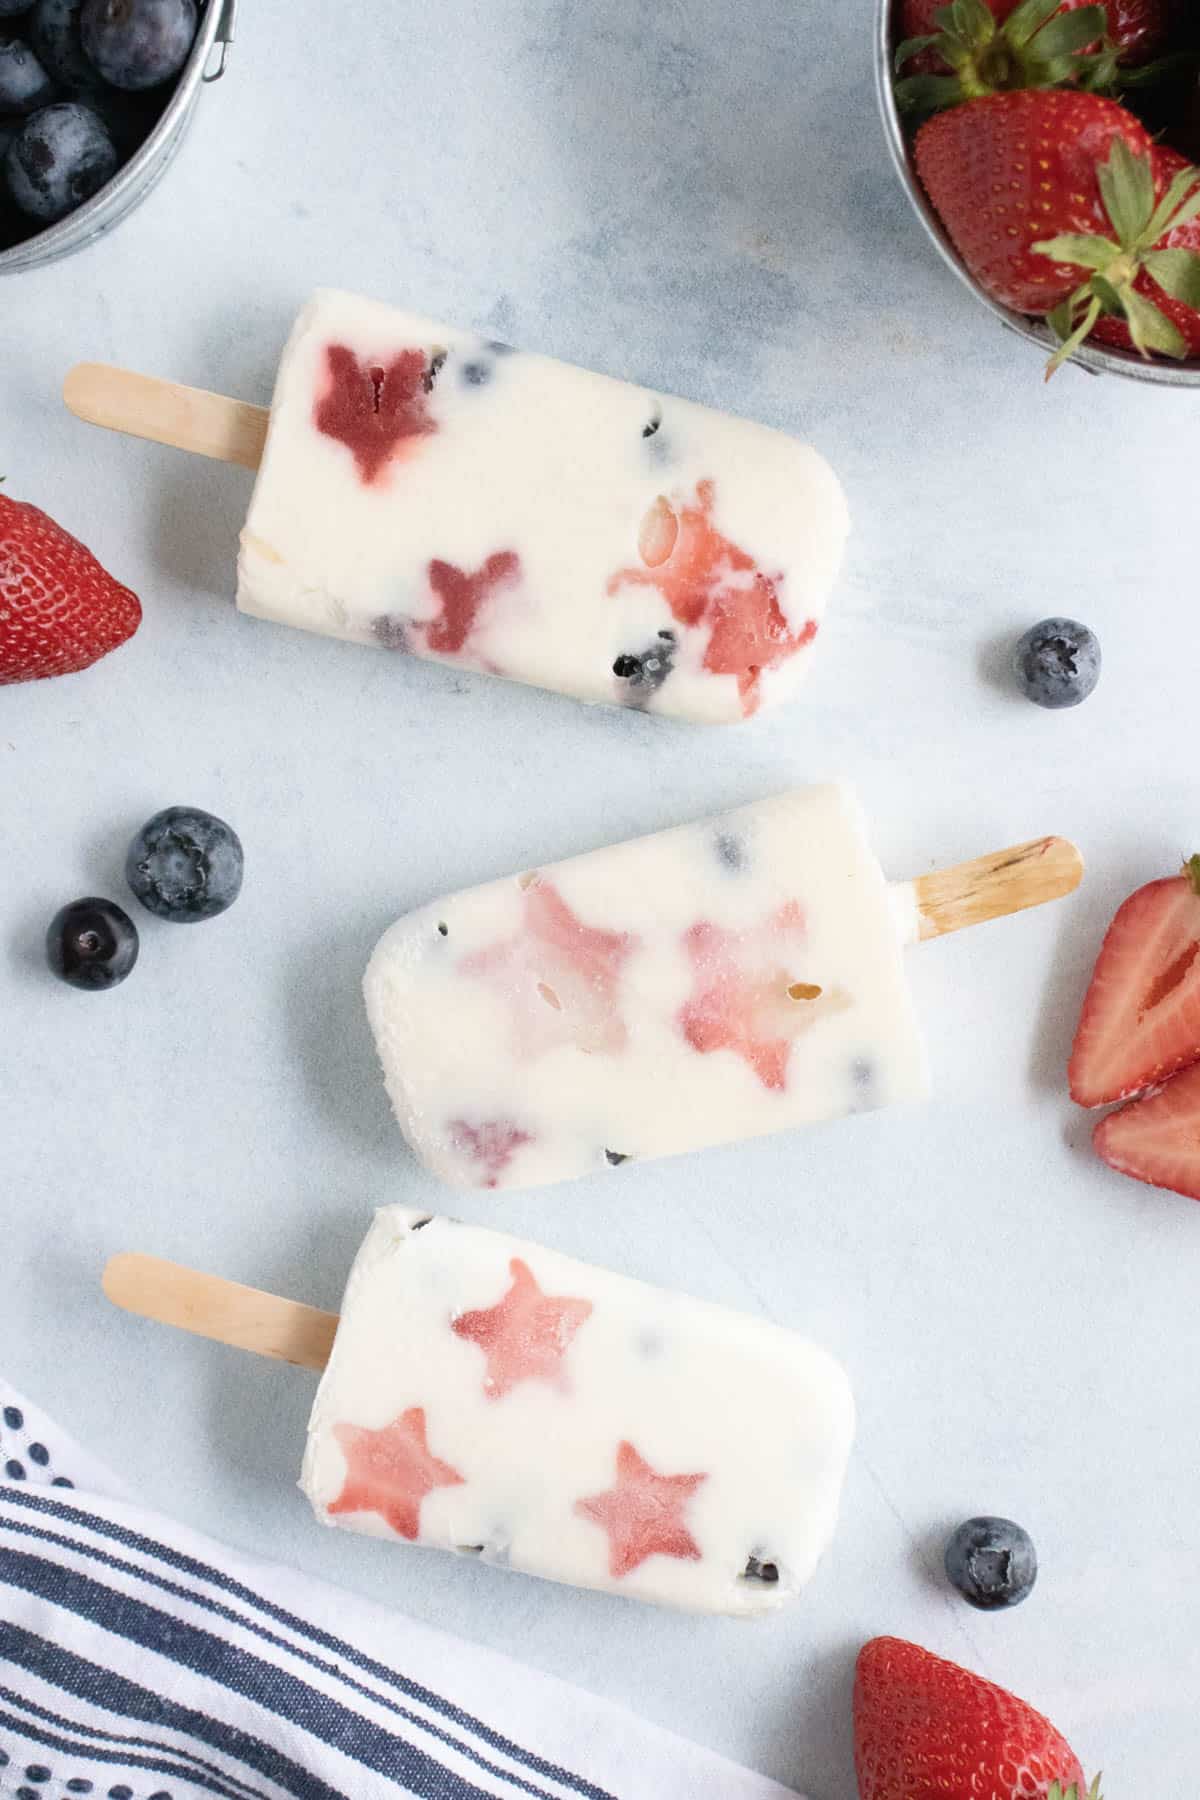 Three fruit and yogurt popsicles in patriotic red white and blue colors.